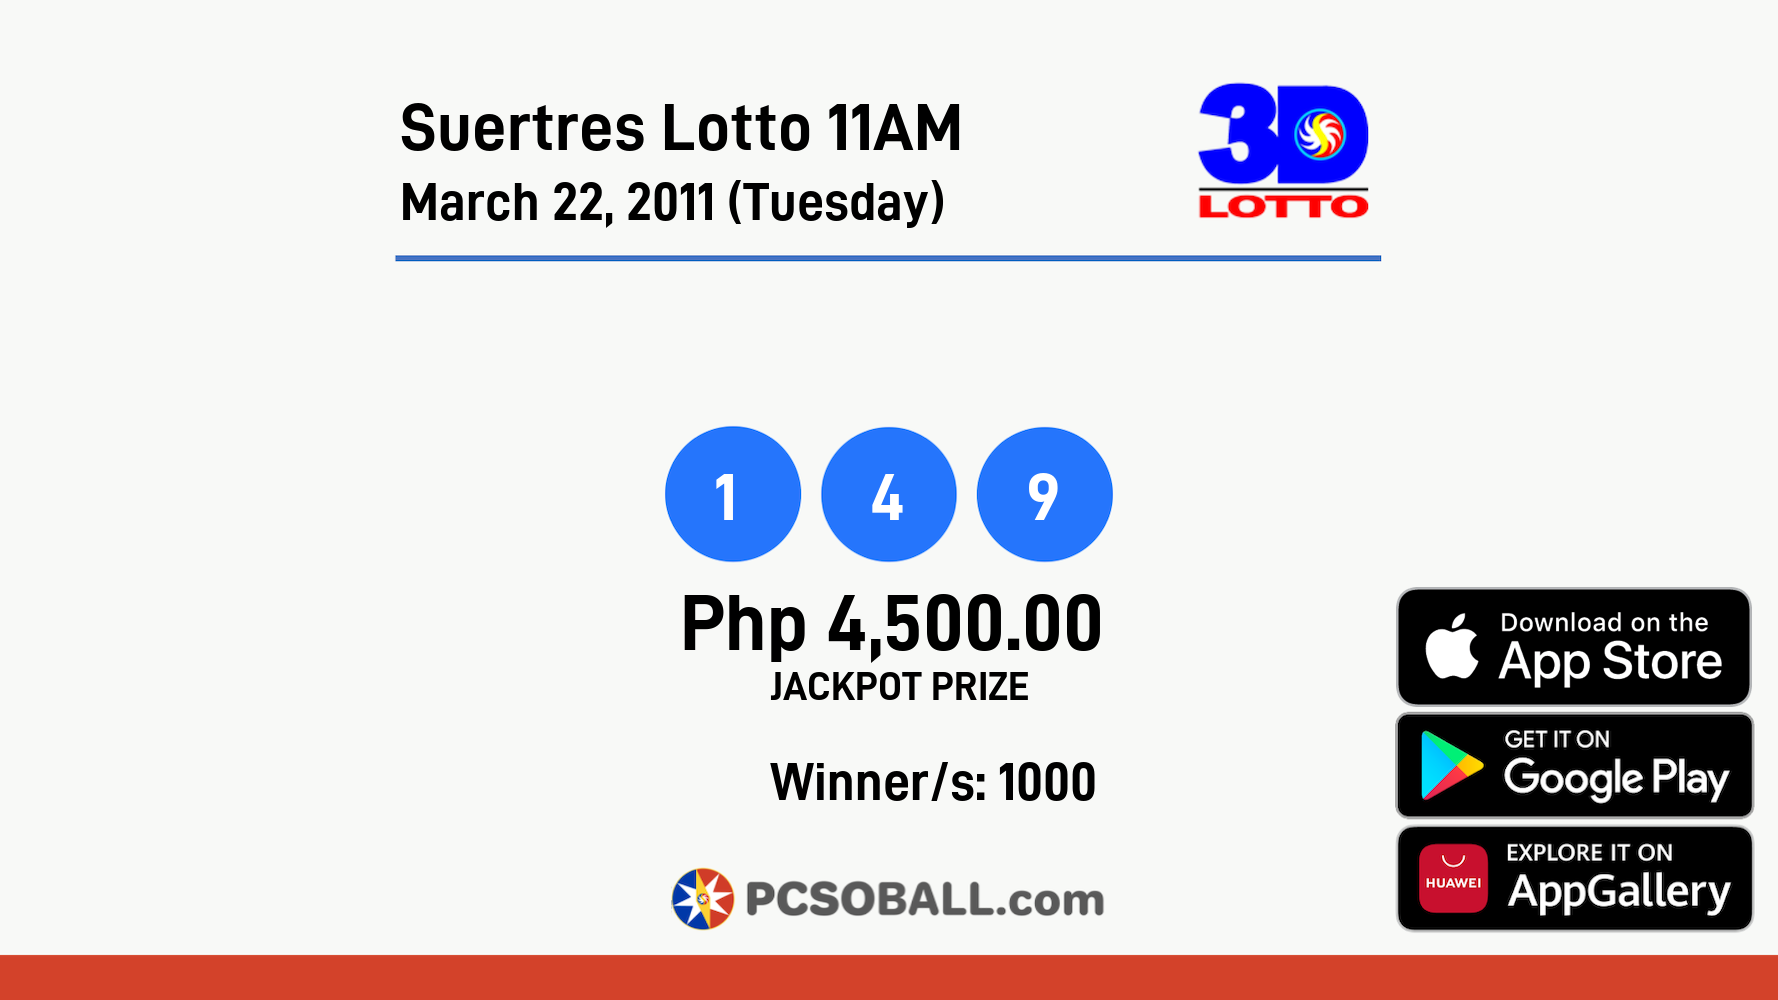 Suertres Lotto 11AM March 22, 2011 (Tuesday) Result